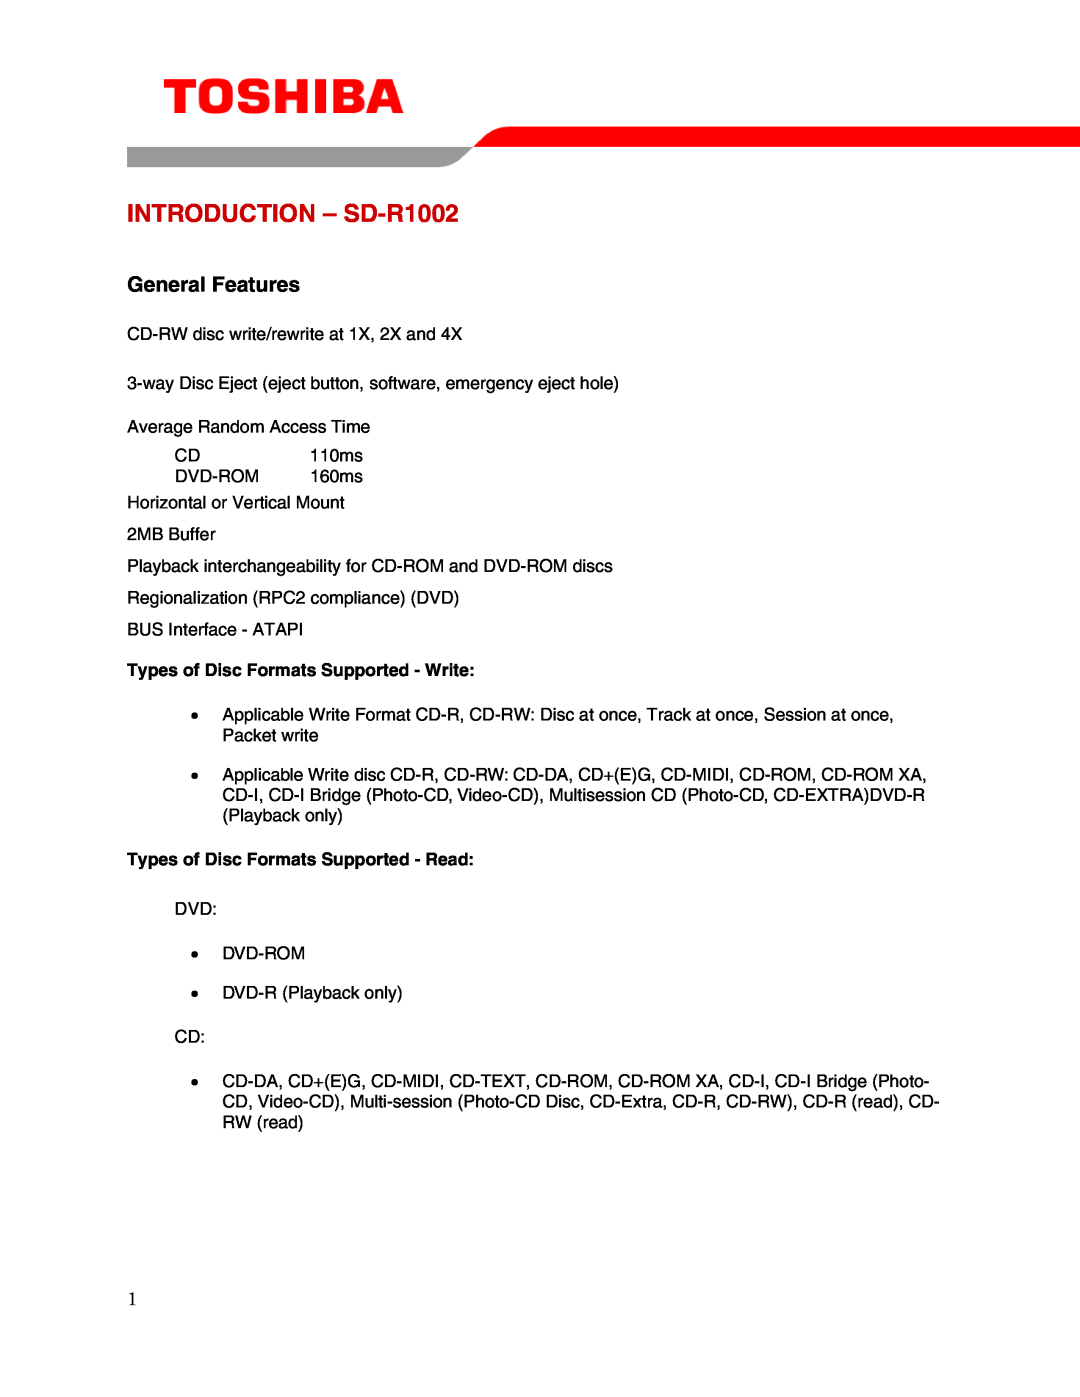 Toshiba user manual INTRODUCTION - SD-R1002, General Features 